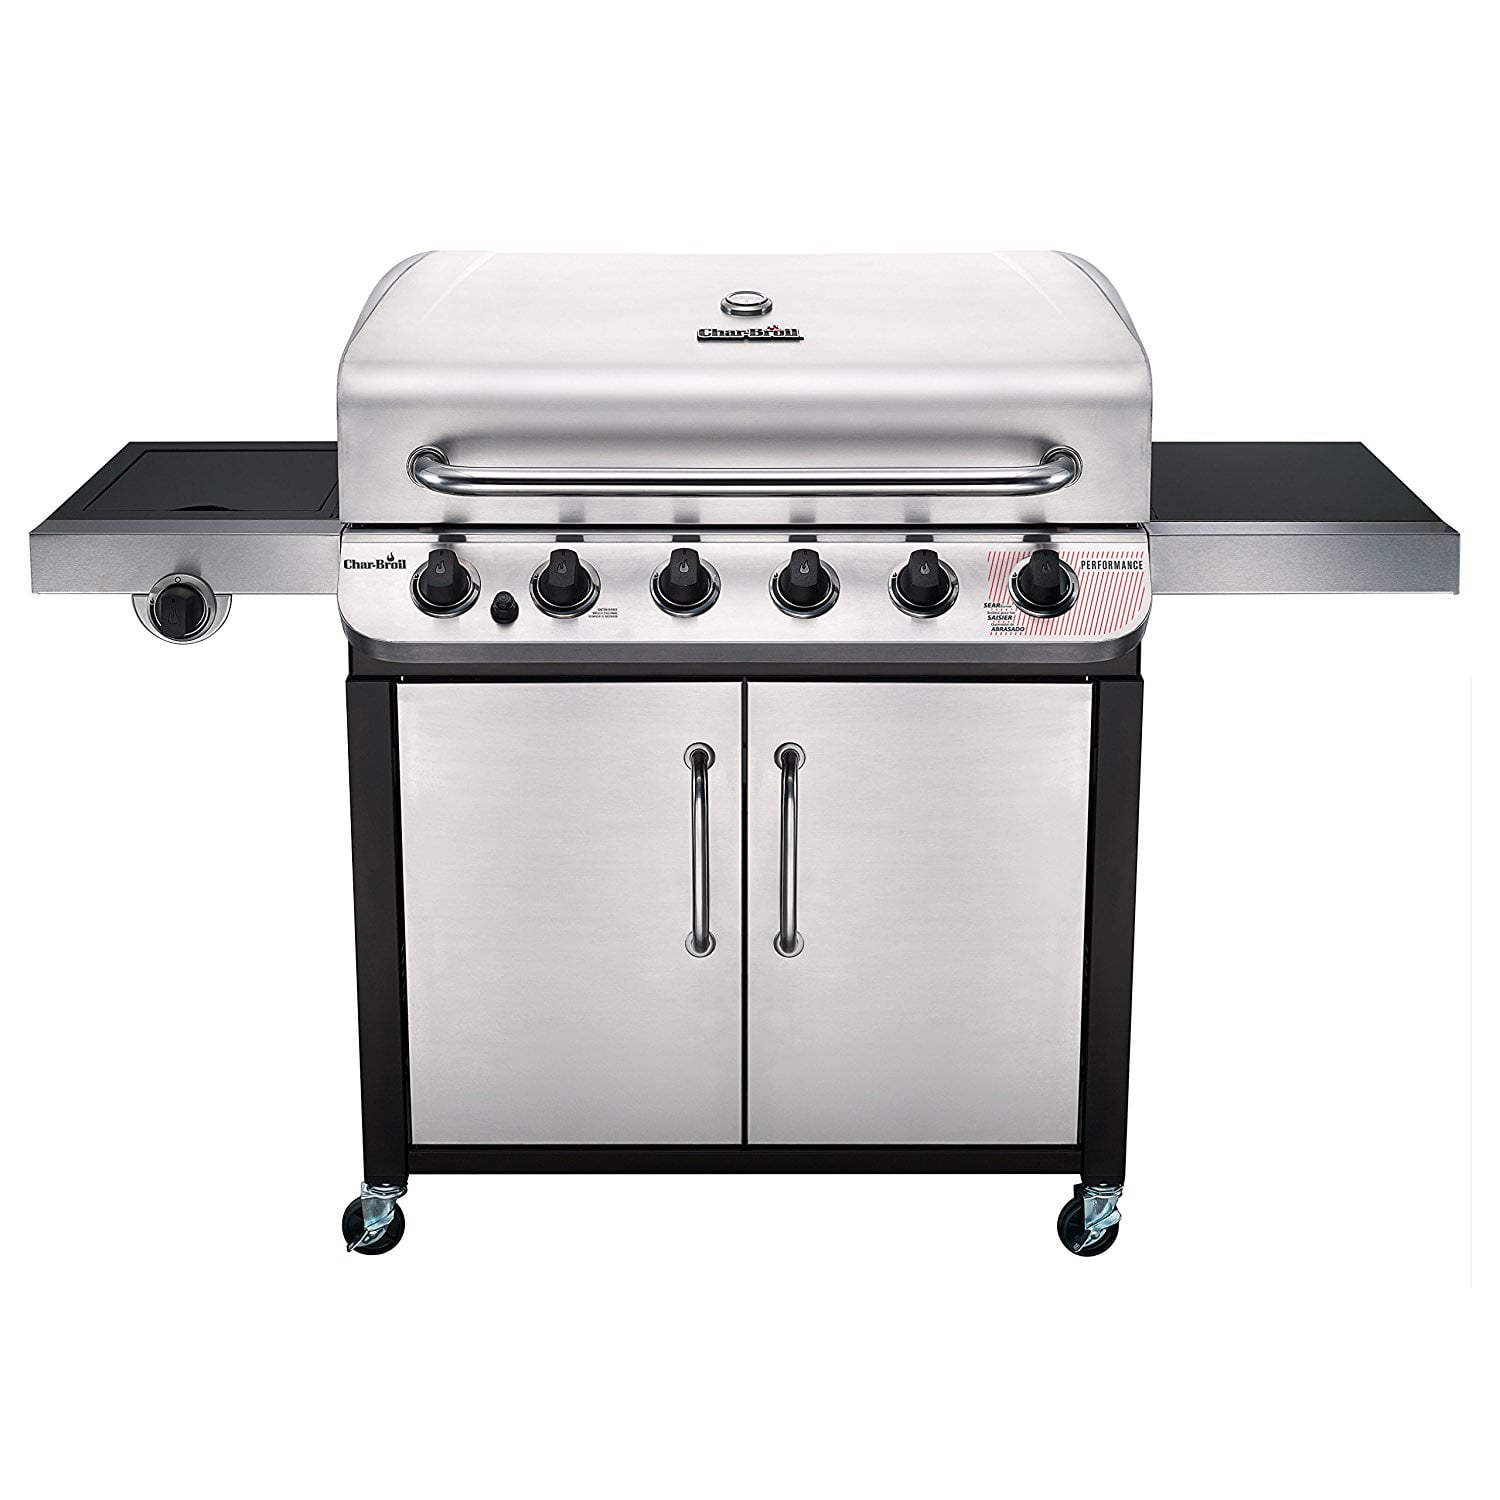 Char-Broil Performance Series 6-burner Propane Gas Grill with Side Black & Stainless - Walmart.com